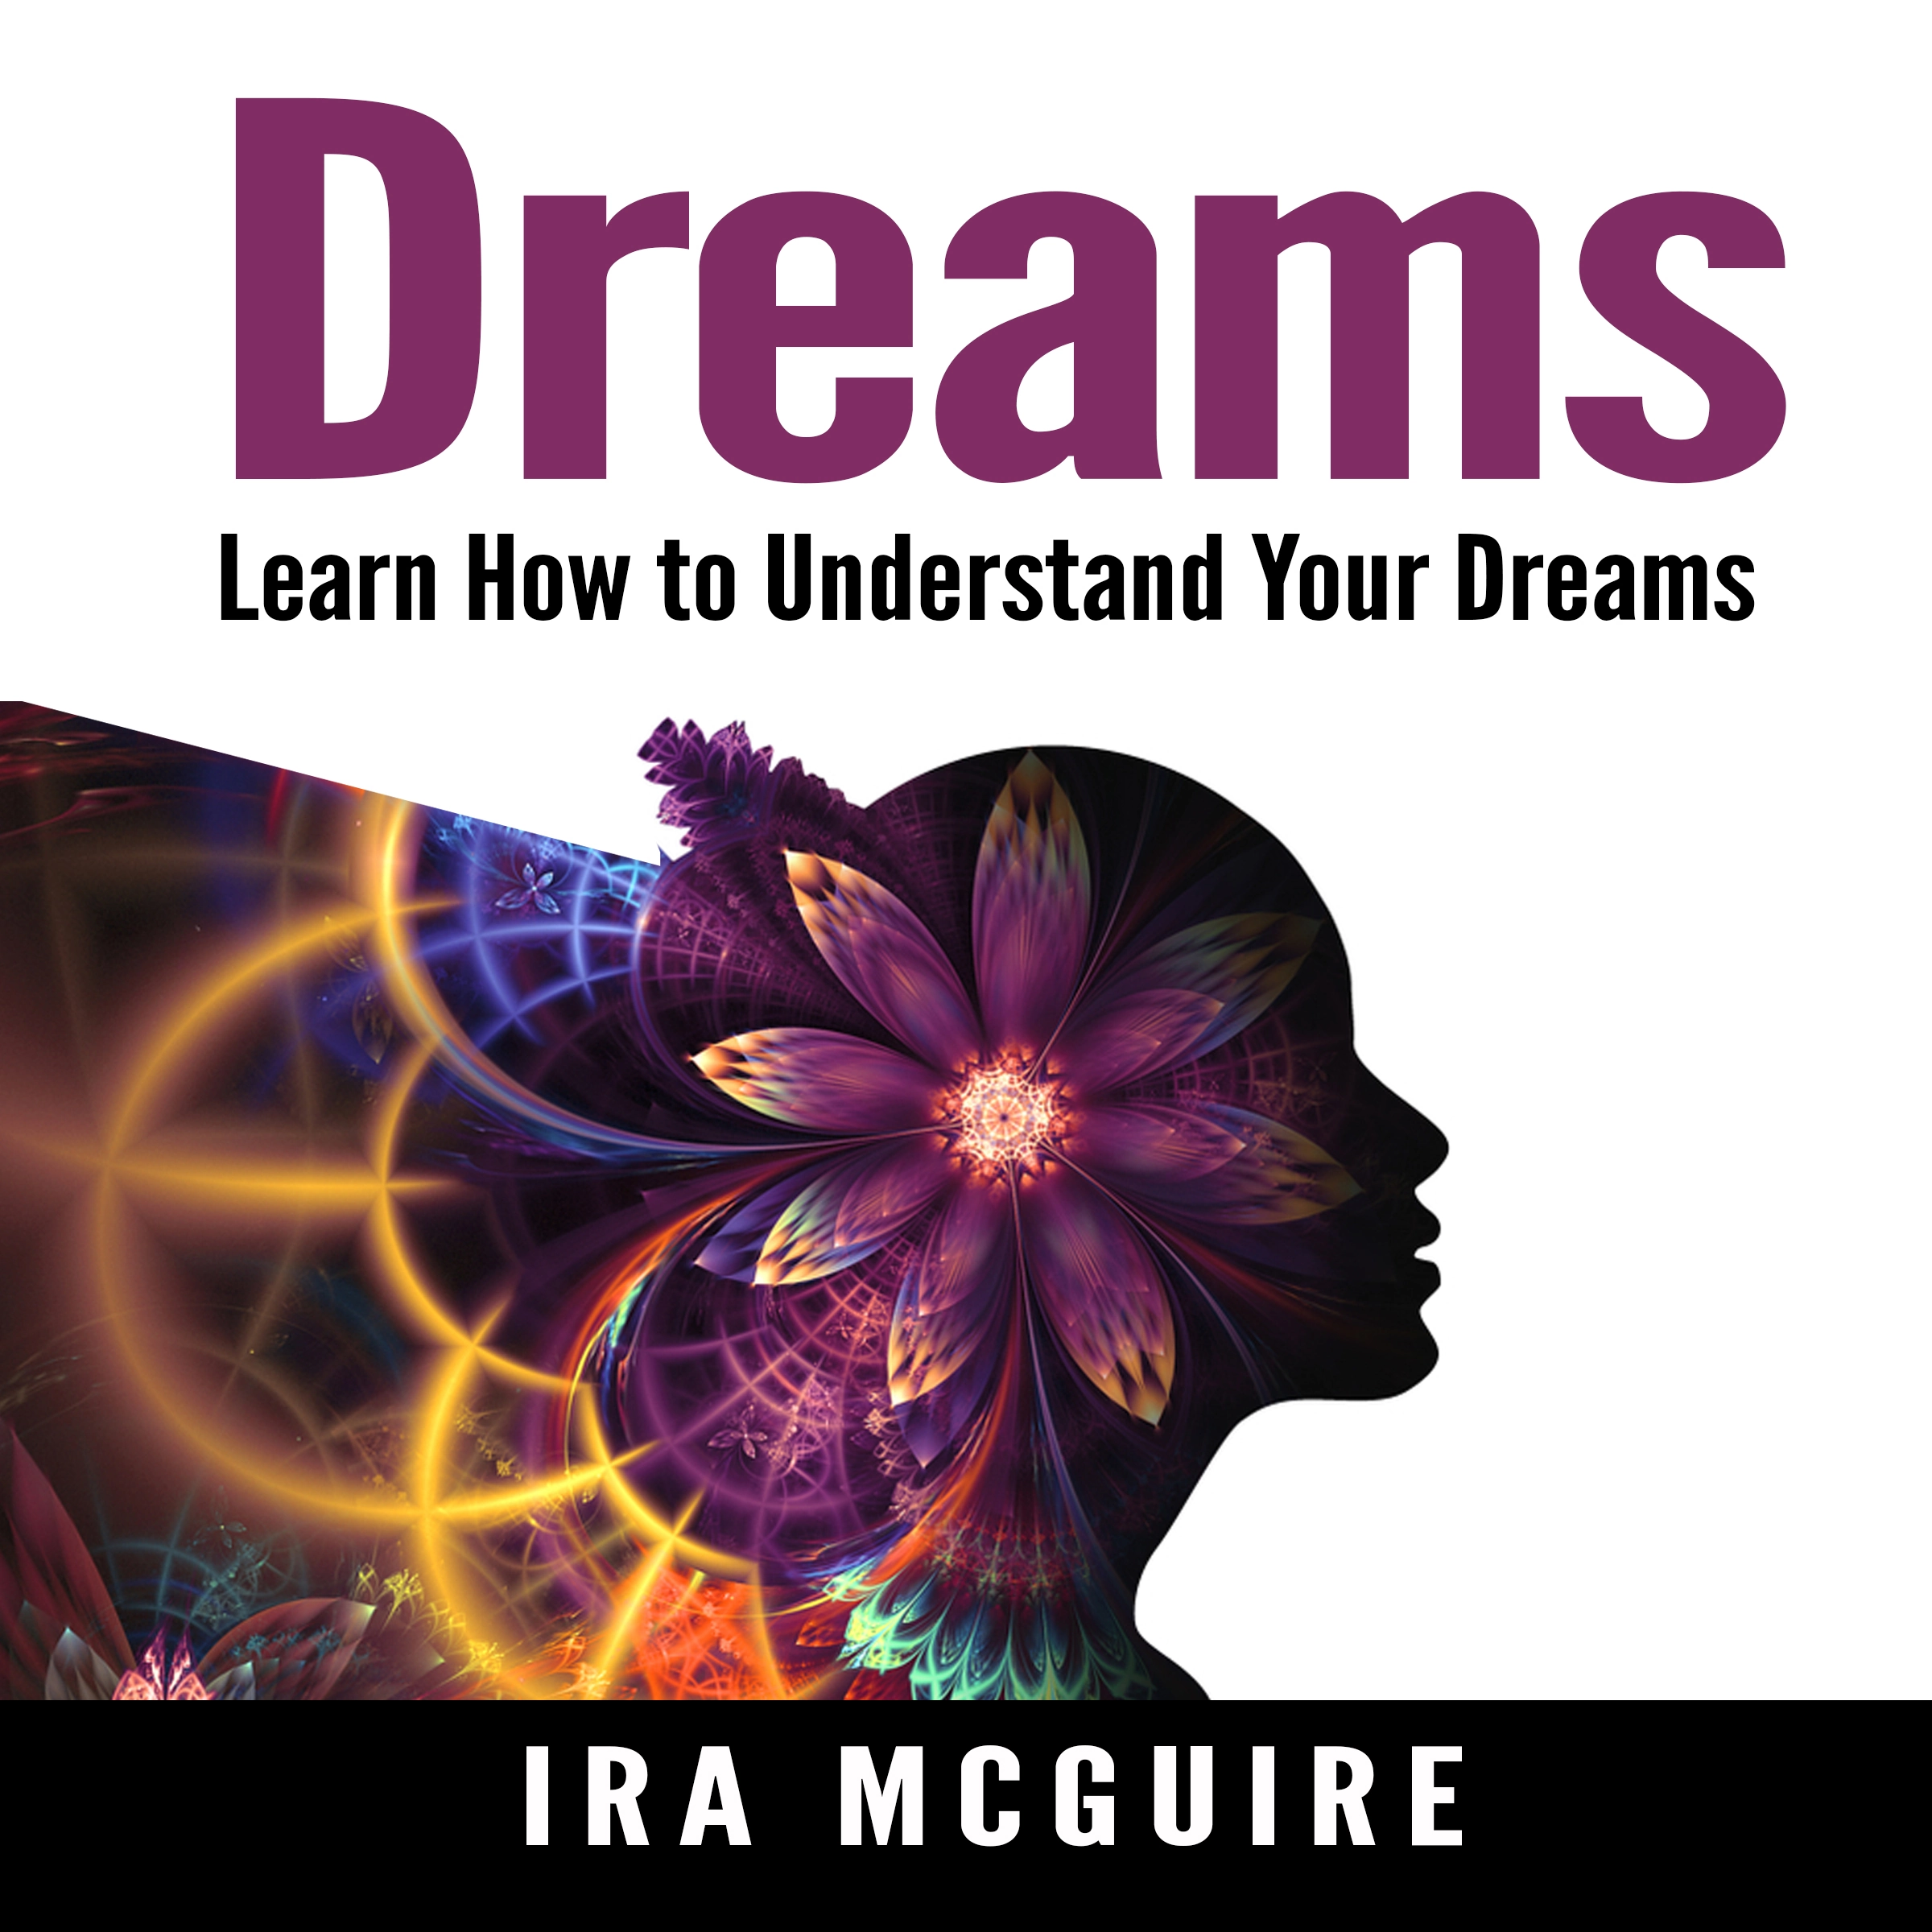 Dreams: The Ultimate Guide to Understanding the Dreams You Dream Audiobook by Ira Mcguire